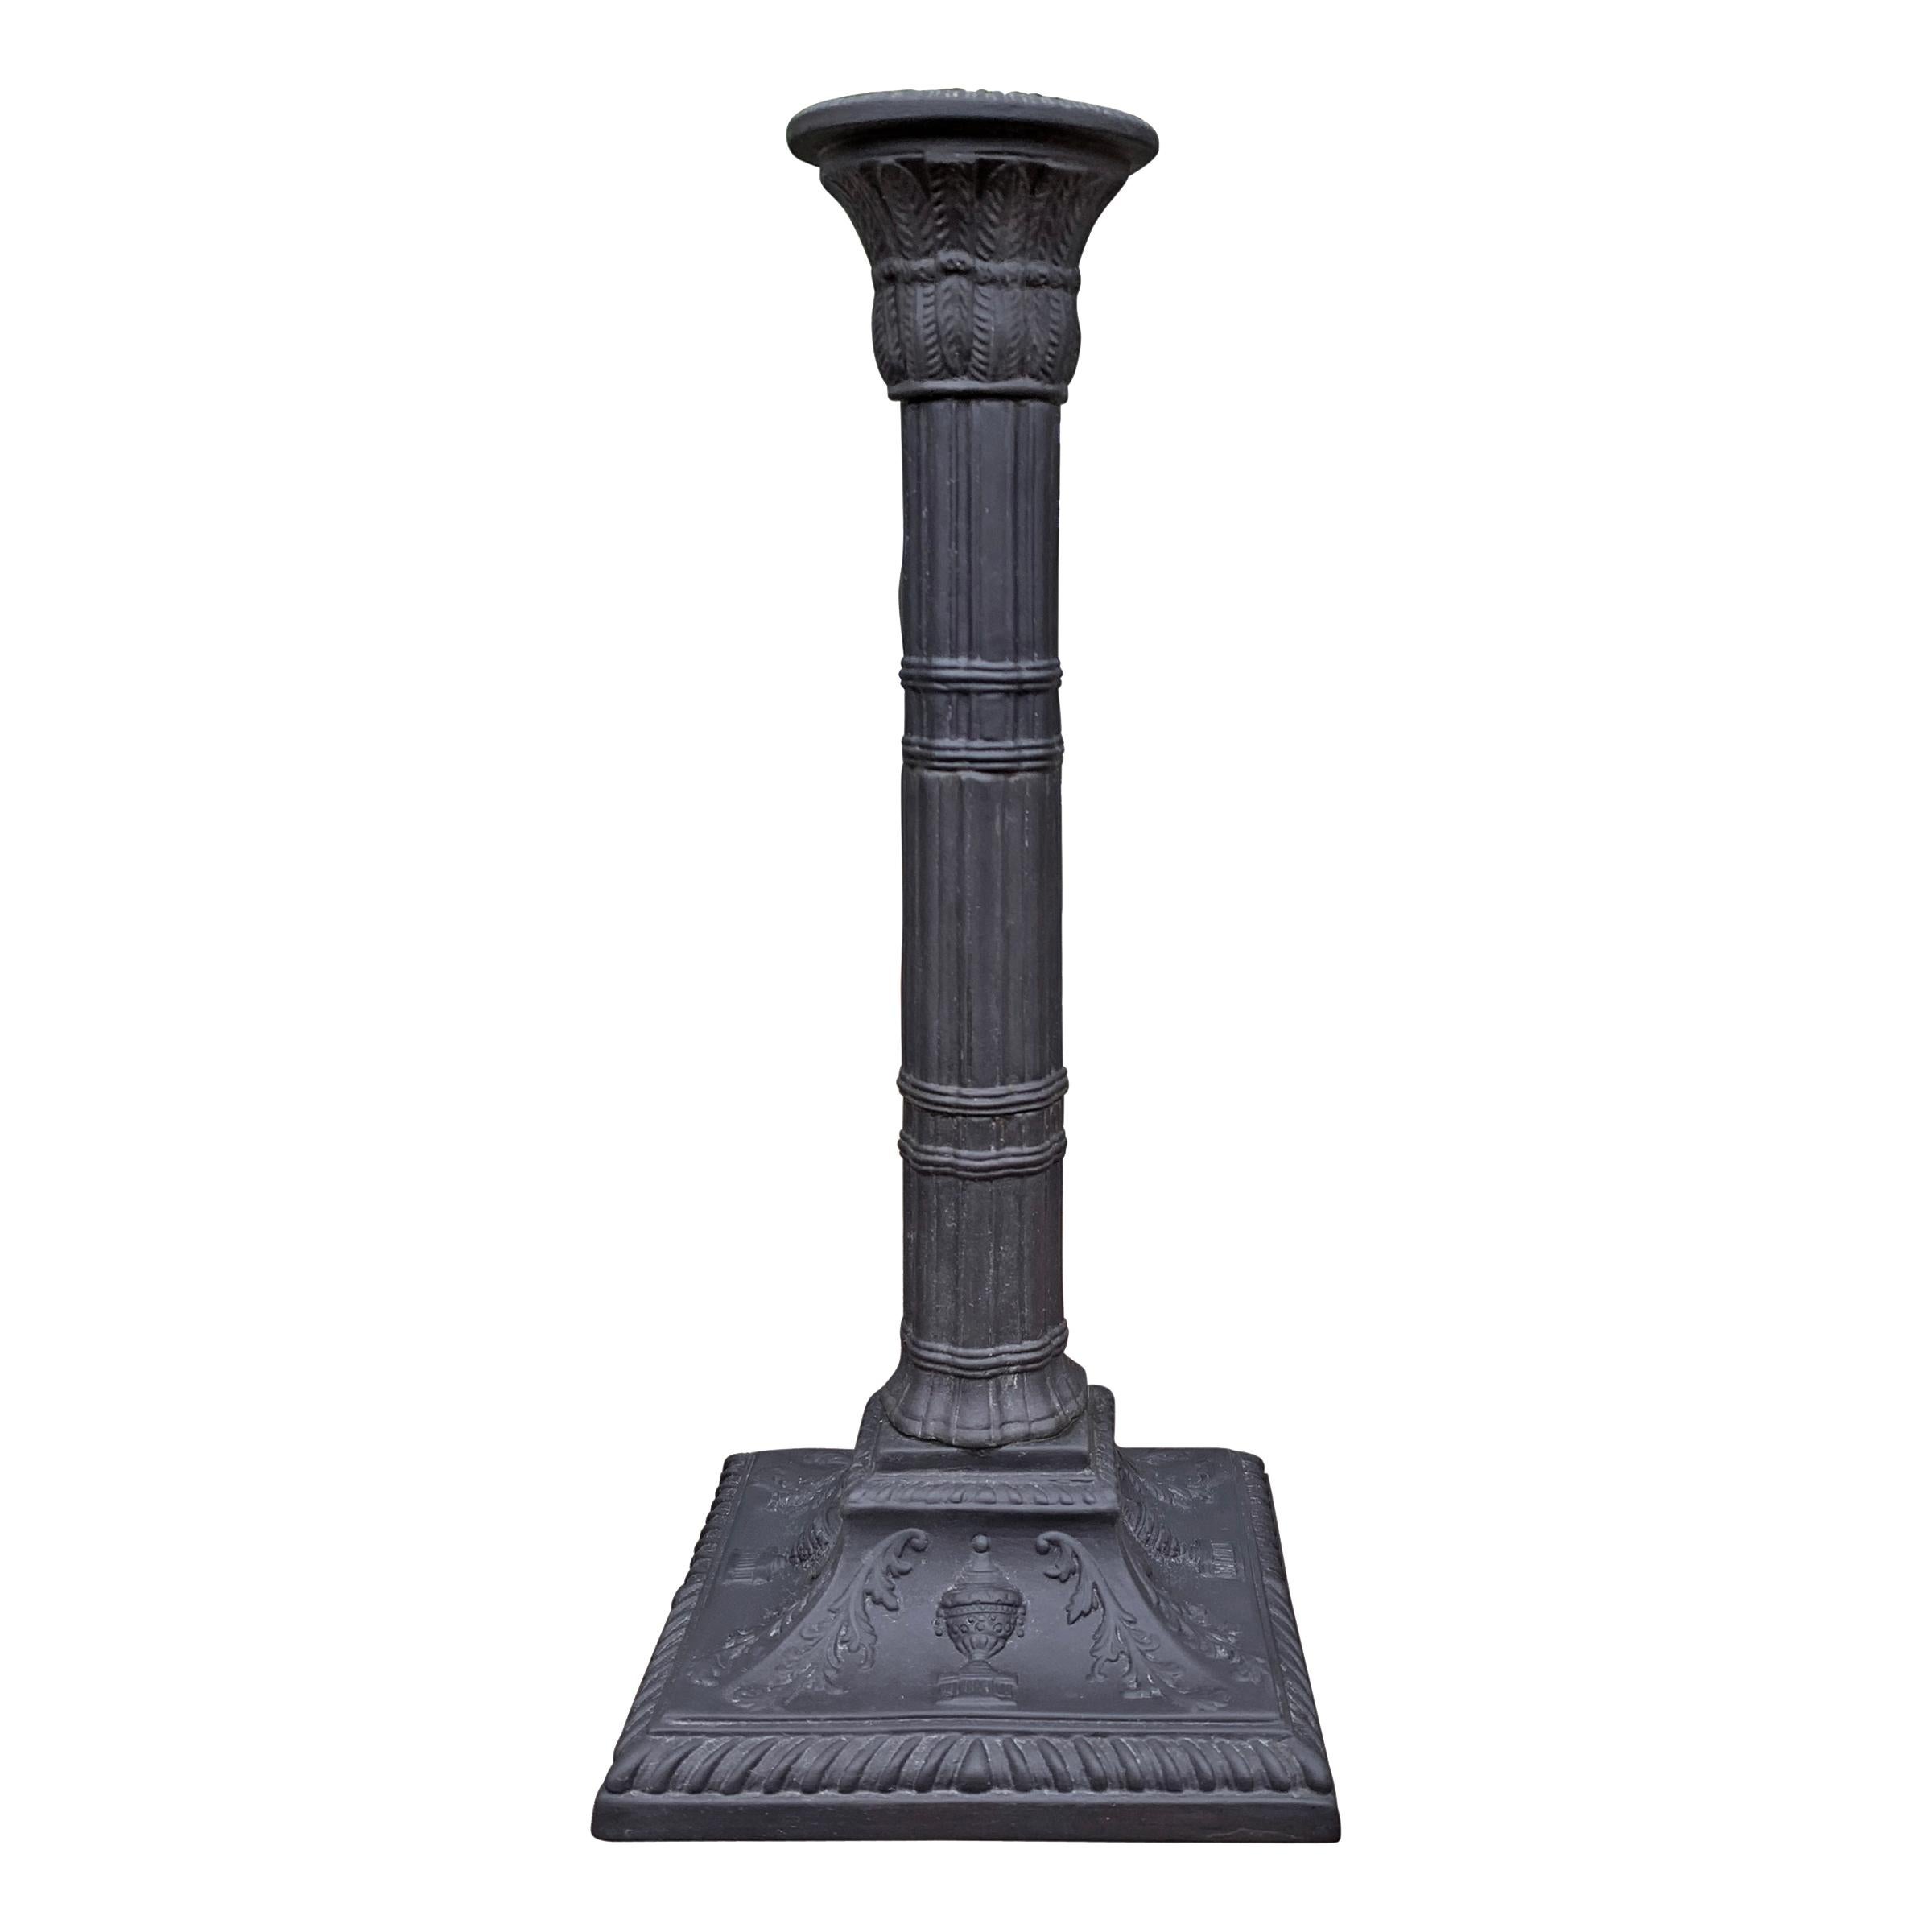 A set of four mid-20th century Italian Mottahedeh basalt candlesticks of classical form with quasi-Egyptian motif including reeded columns with papyrus leaf capitals, all on a square raised platform with acanthus leaves and urns on each side.